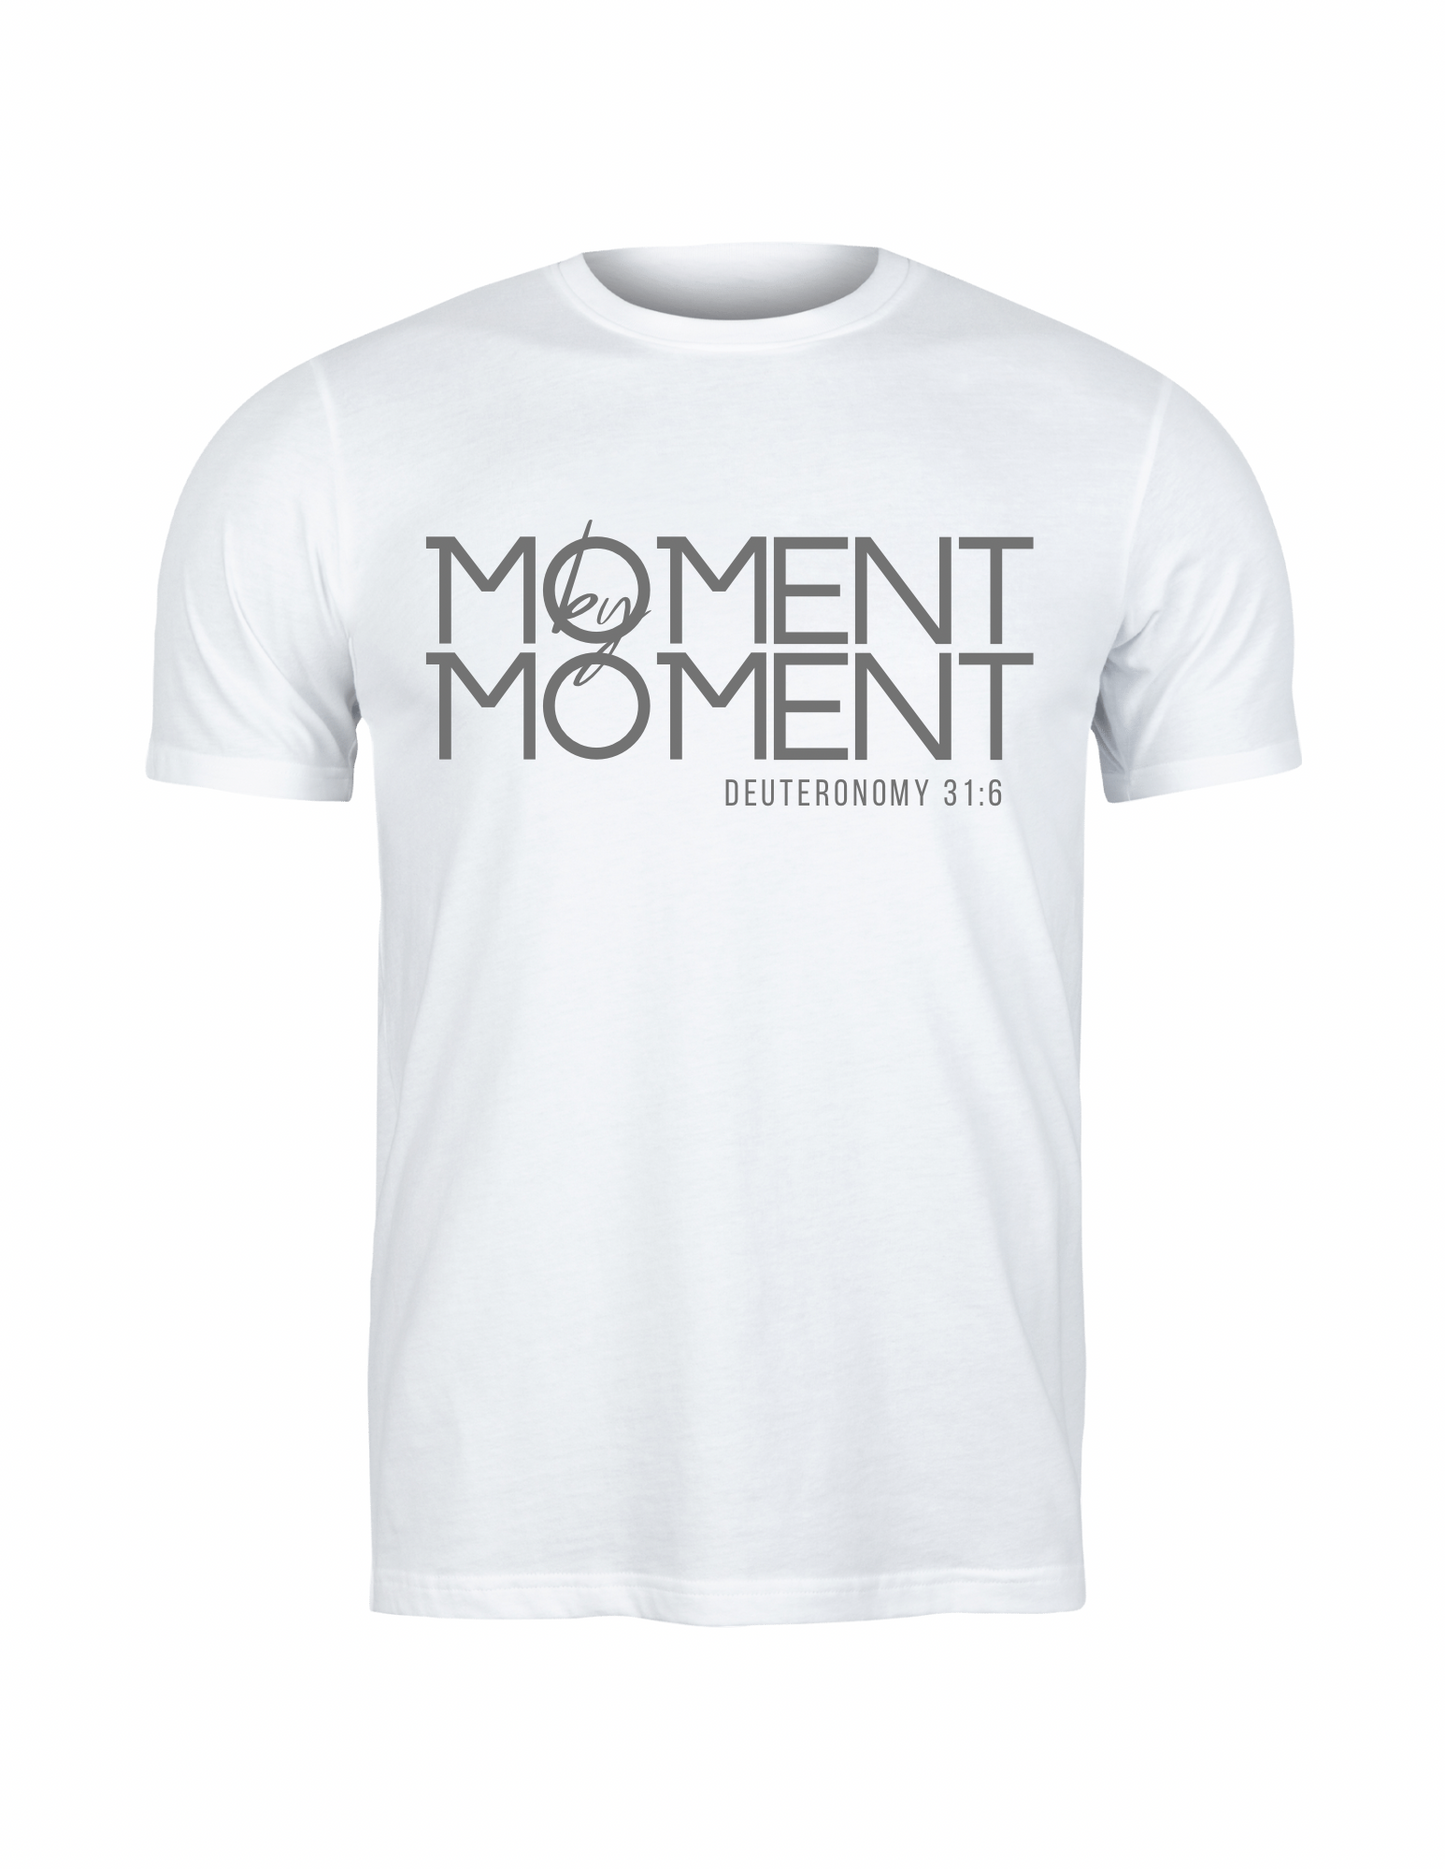 Momemt by Moment Tee